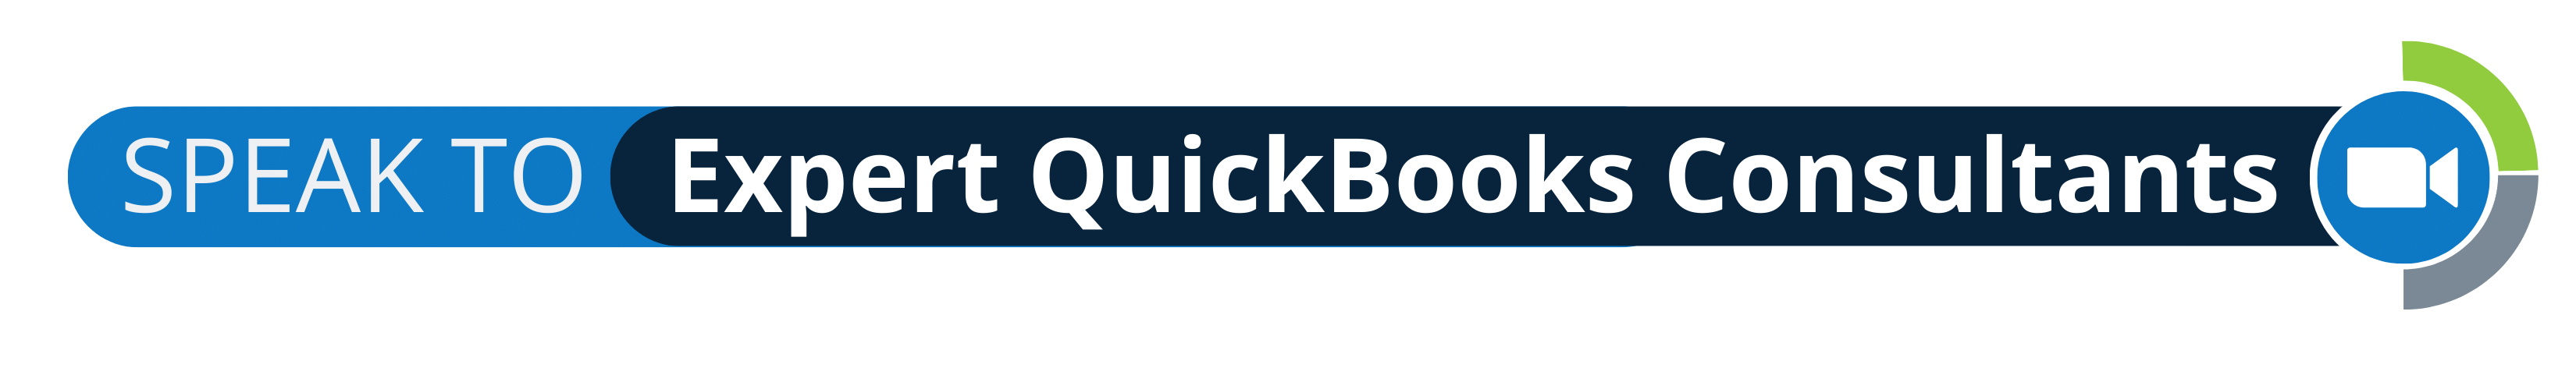 Work-with-Certified-QuickBooks-Consultants-at-Fusion-CPA-for-automating-accounting-processes